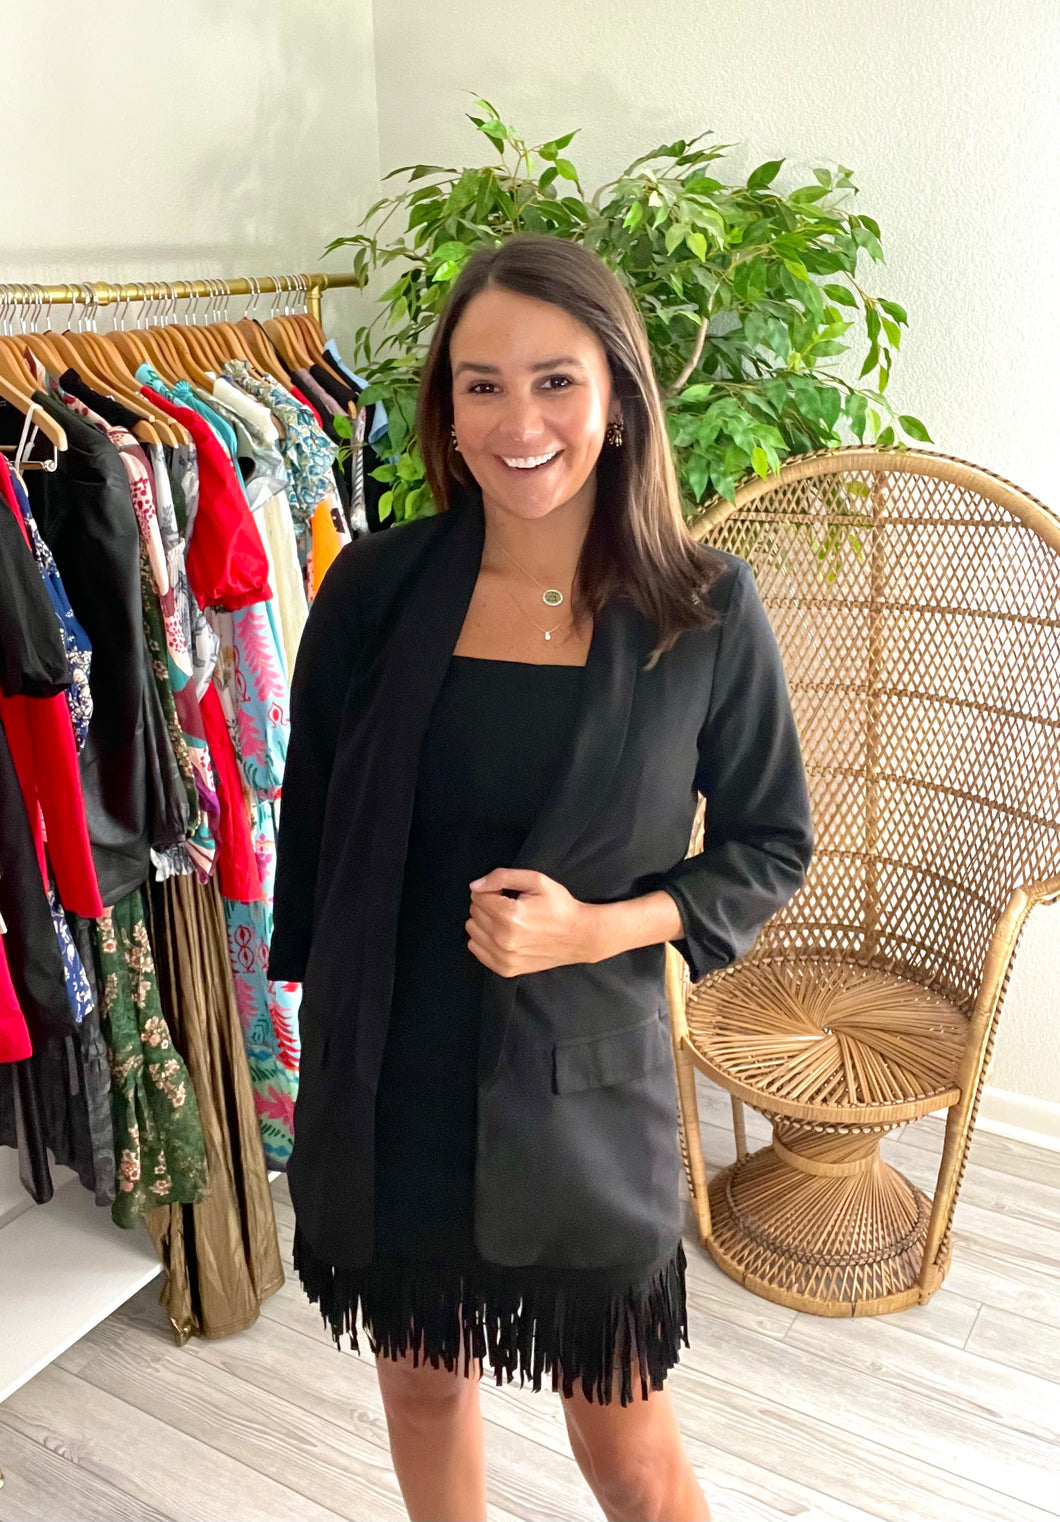 Oversized fitted blazer. Tailored through shoulders and arms, loose fitting through body. Tucked sleeves. Poly spandex blend.  True to size, wearing size small.